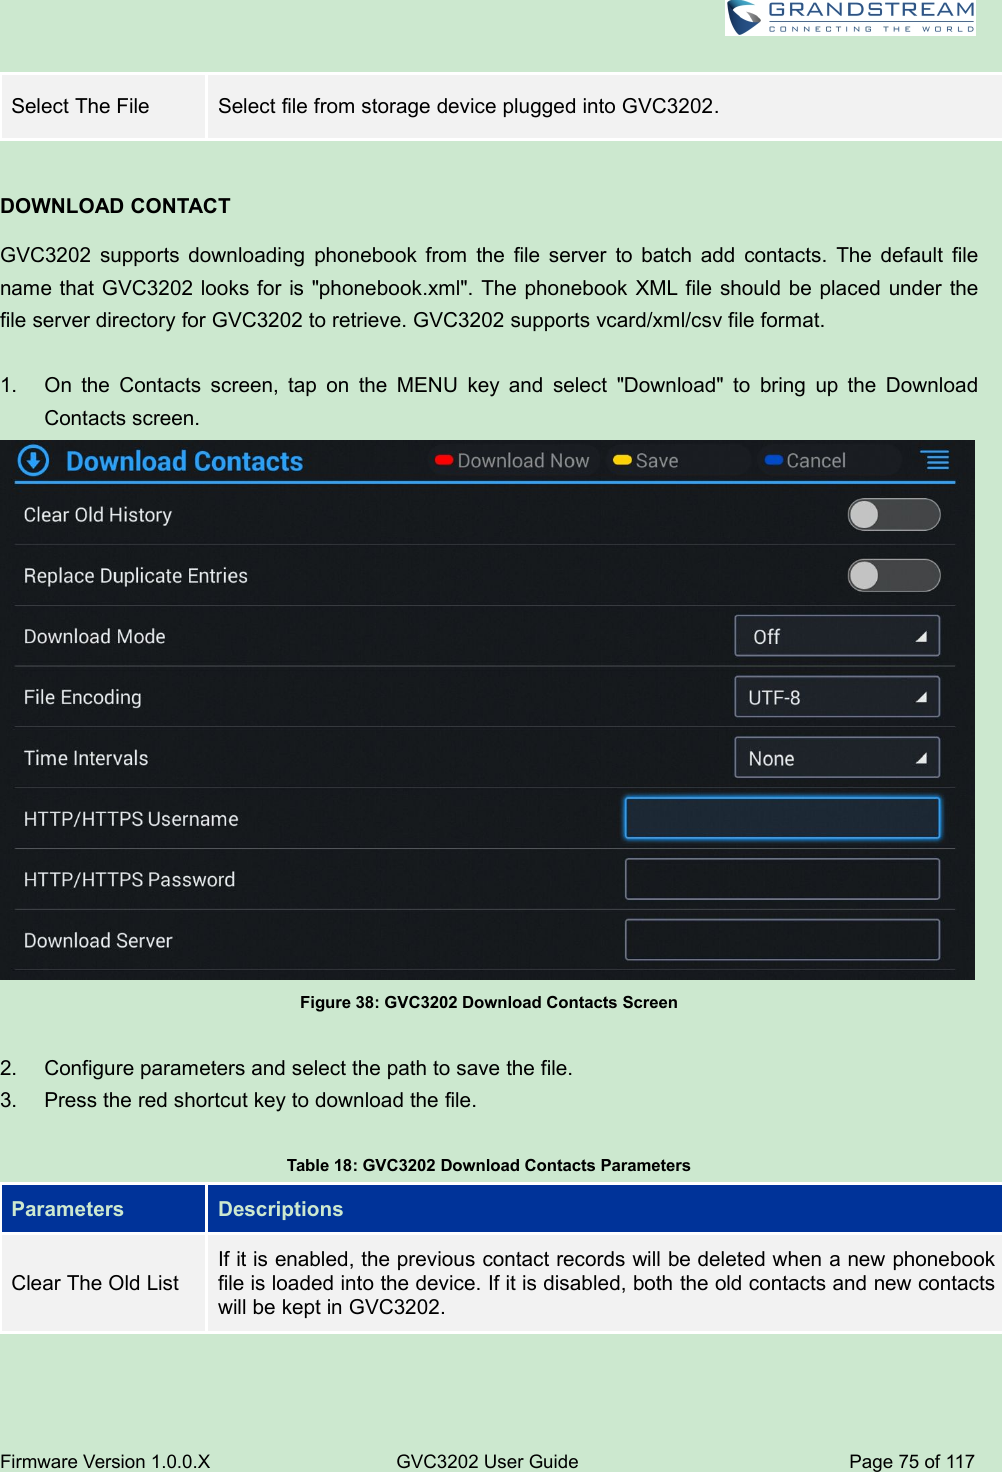 Firmware Version 1.0.0.XGVC3202 User GuidePage 75 of 117Select The FileSelect file from storage device plugged into GVC3202.DOWNLOAD CONTACTGVC3202 supports downloading phonebook from the file server to batch add contacts. The default filename that GVC3202 looks for is &quot;phonebook.xml&quot;. The phonebook XML file should be placed under thefile server directory for GVC3202 to retrieve. GVC3202 supports vcard/xml/csv file format.1. On the Contacts screen, tap on the MENU key and select &quot;Download&quot; to bring up the DownloadContacts screen.Figure 38: GVC3202 Download Contacts Screen2. Configure parameters and select the path to save the file.3. Press the red shortcut key to download the file.Table 18: GVC3202 Download Contacts ParametersParametersDescriptionsClear The Old ListIf it is enabled, the previous contact records will be deleted when a new phonebookfile is loaded into the device. If it is disabled, both the old contacts and new contactswill be kept in GVC3202.